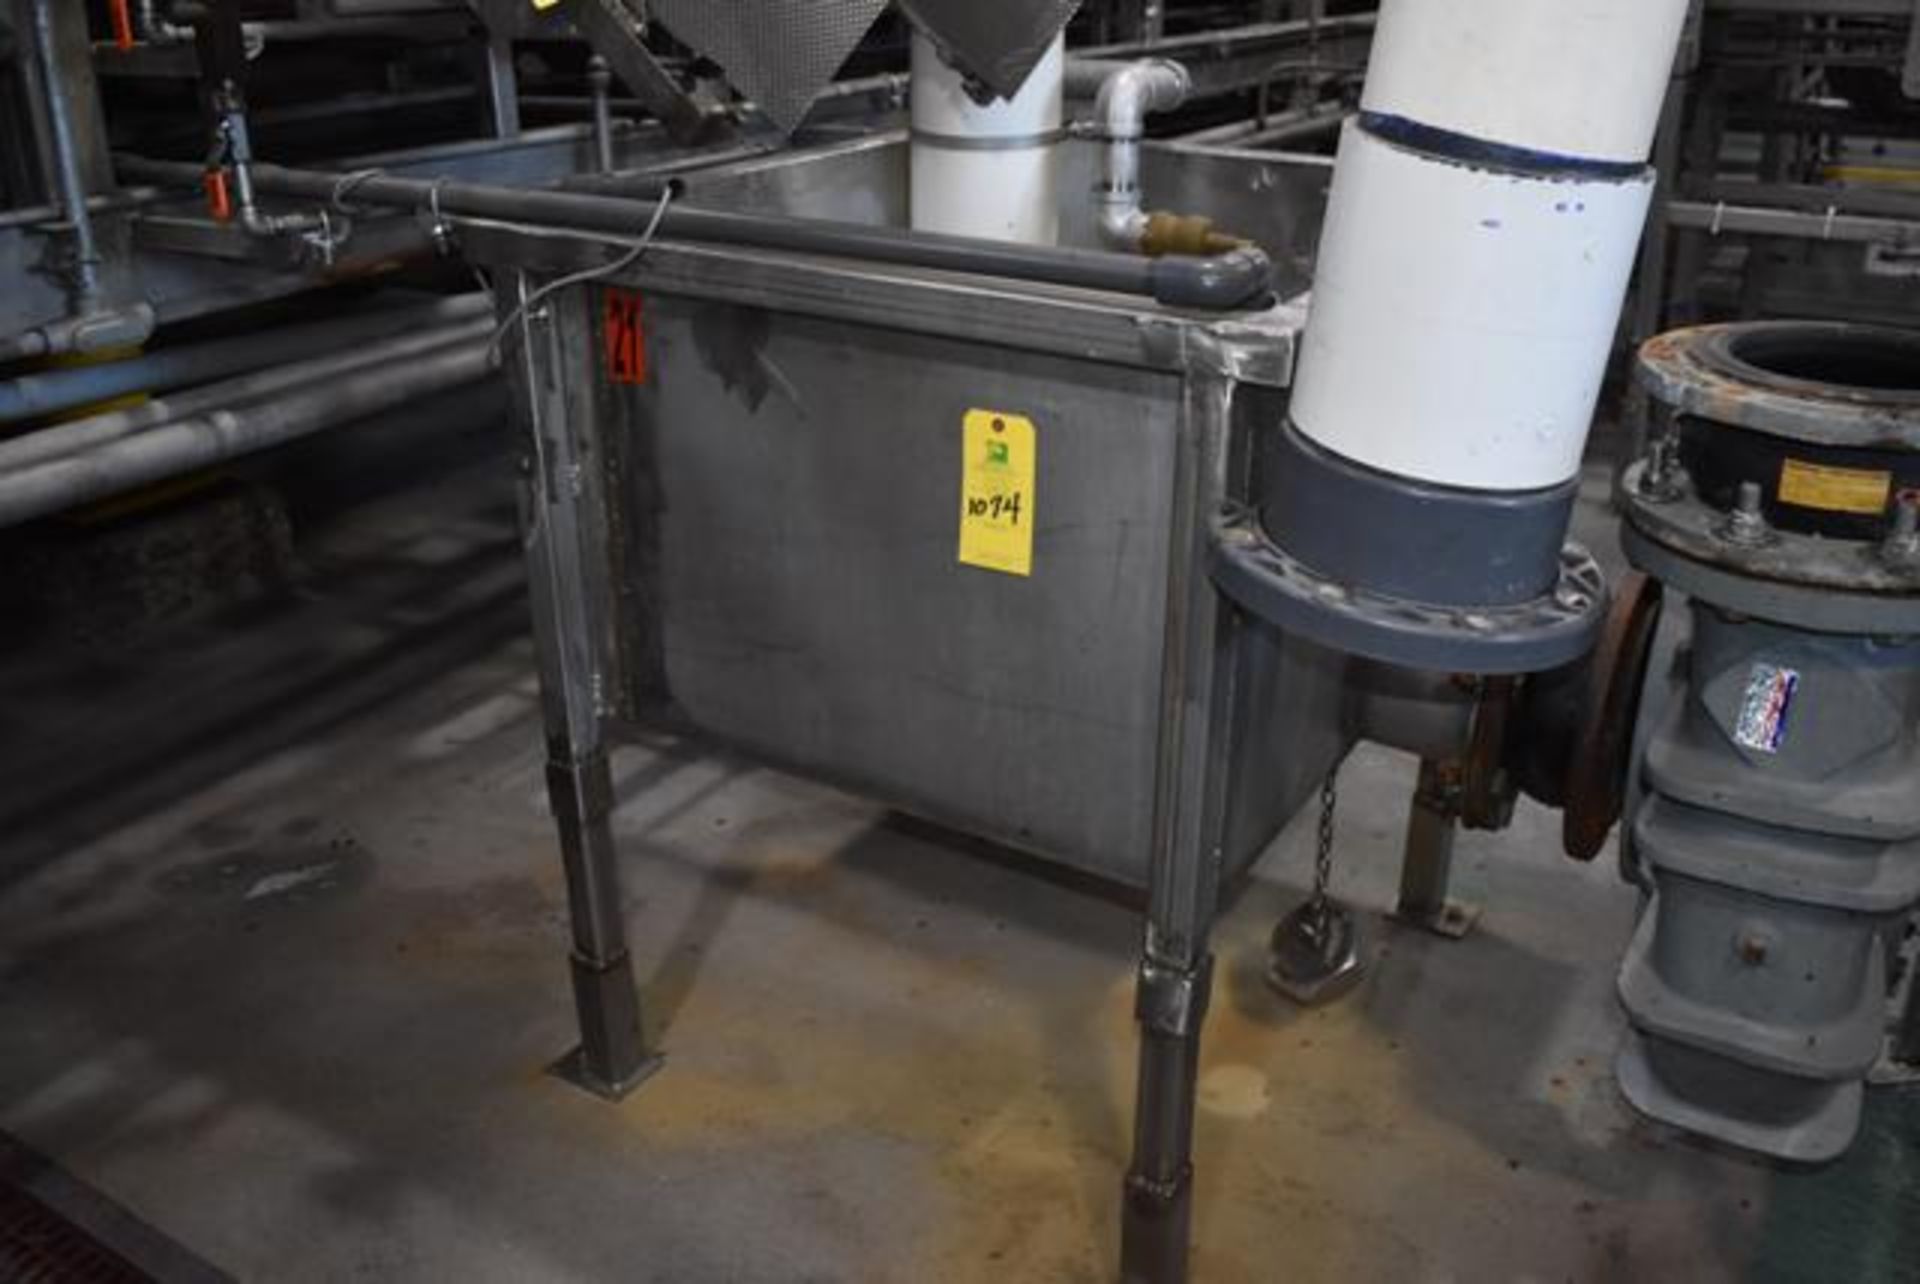 Stainless Steel Product Flow Tank, 36" x 36" x 24" Depth, RIGGING FEE: $200